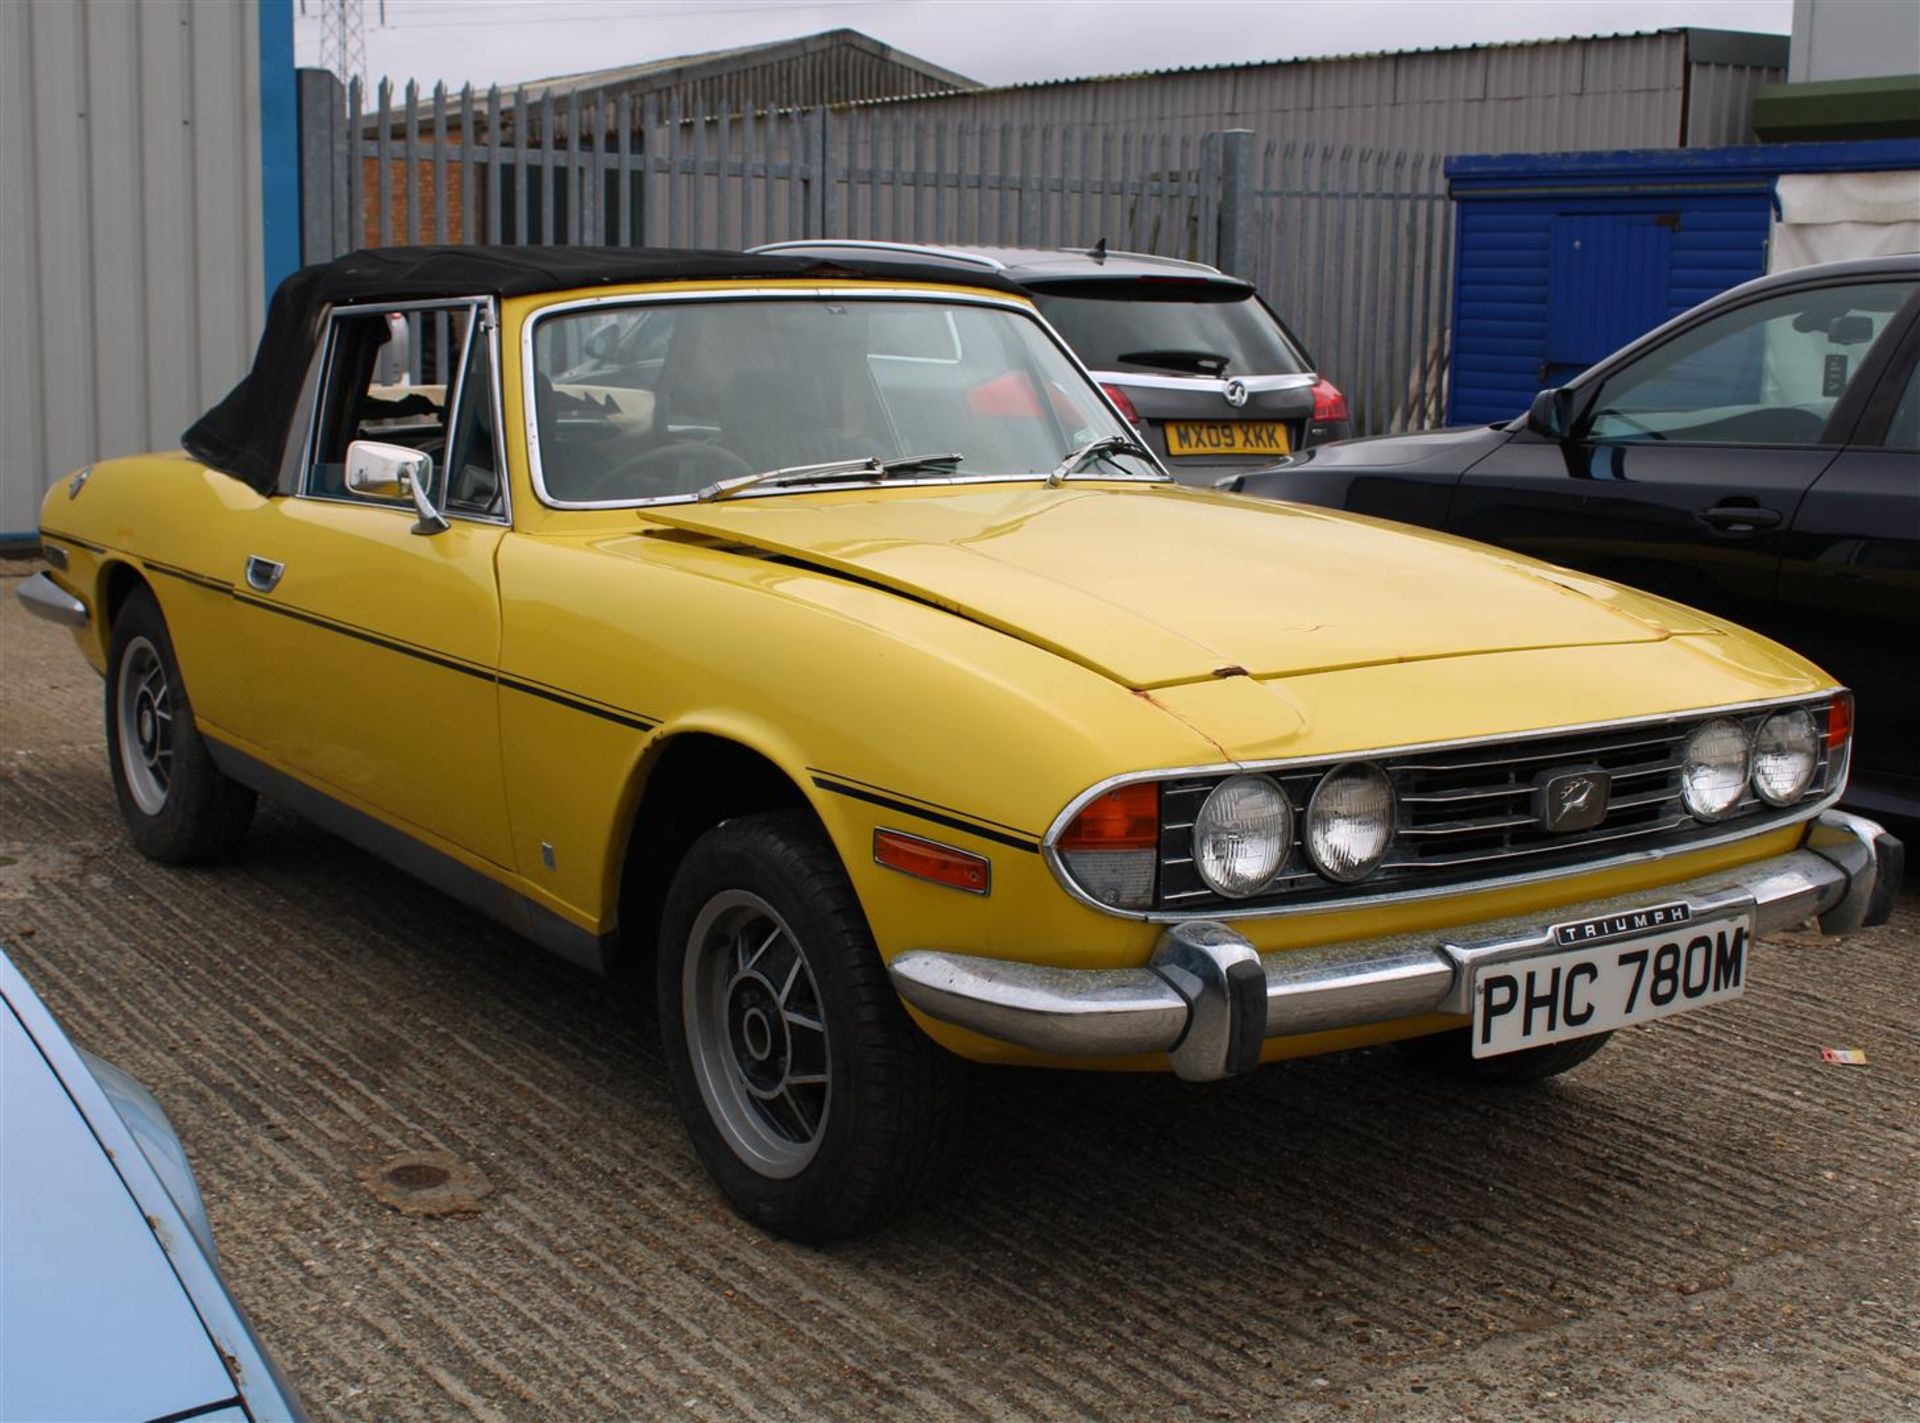 1973 Triumph Stag Rolling shell - Image 6 of 24